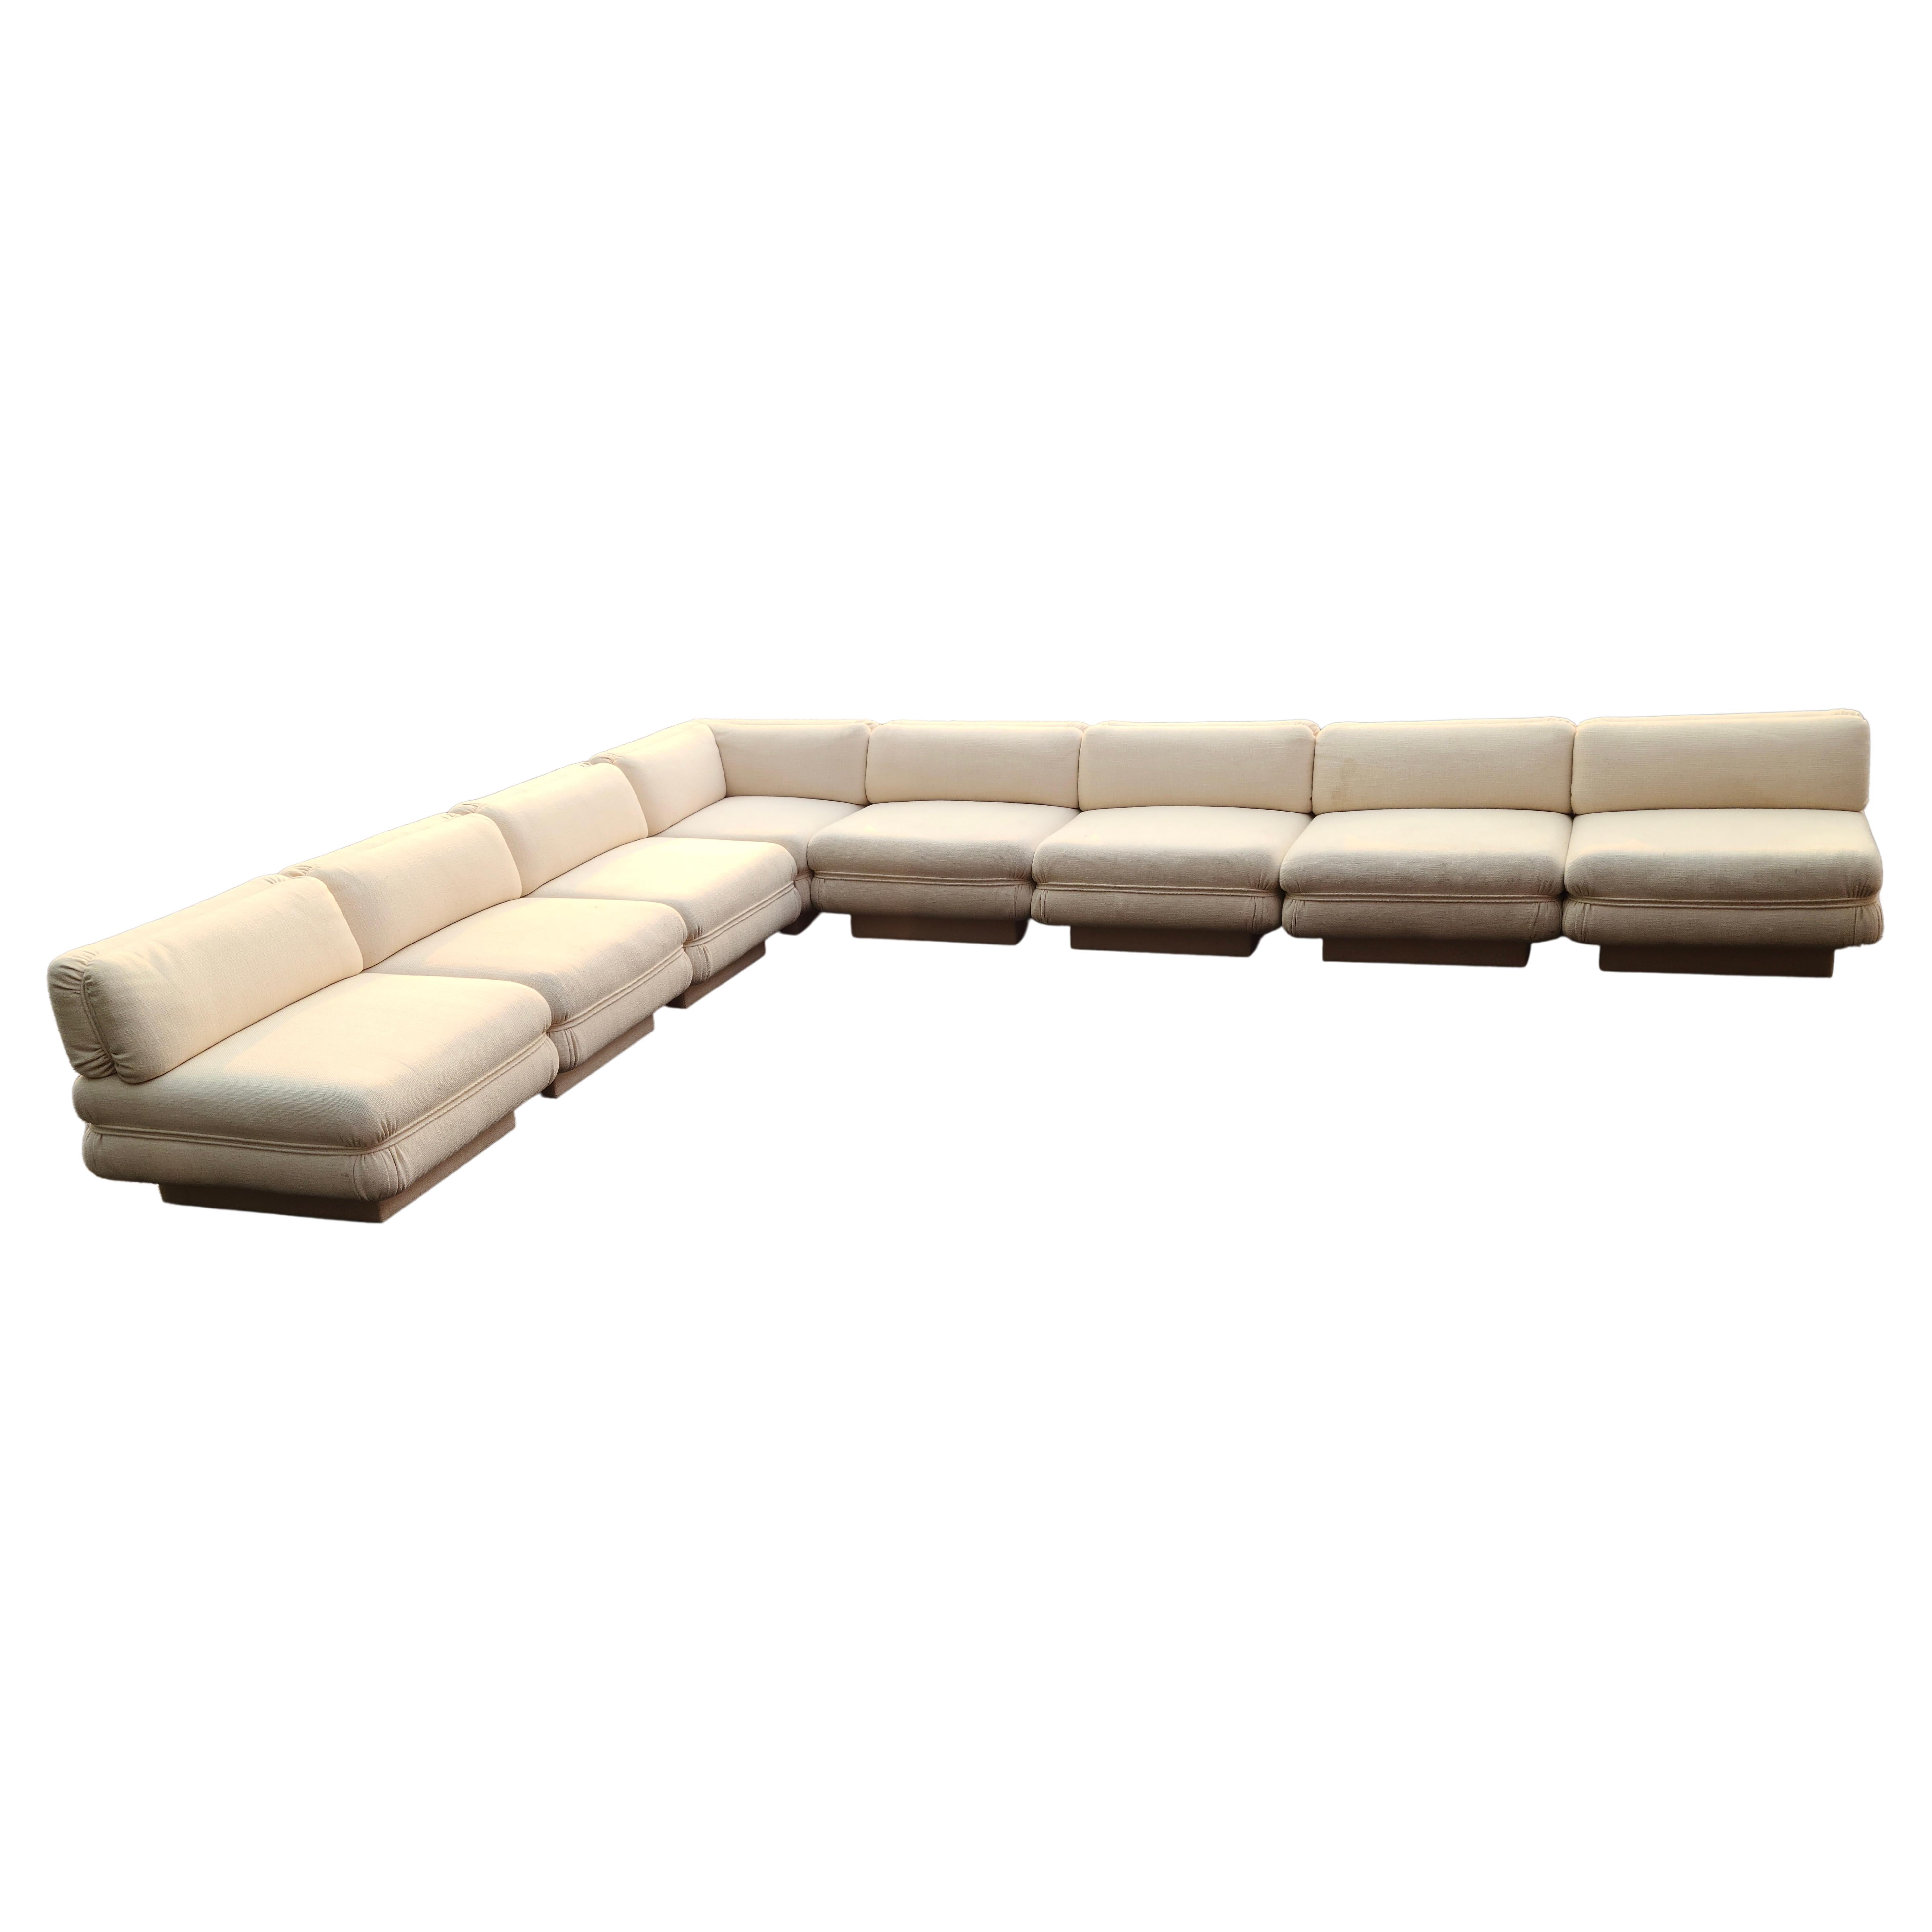 Harvey Probber 8 Piece Sectional Sofa For Sale 2